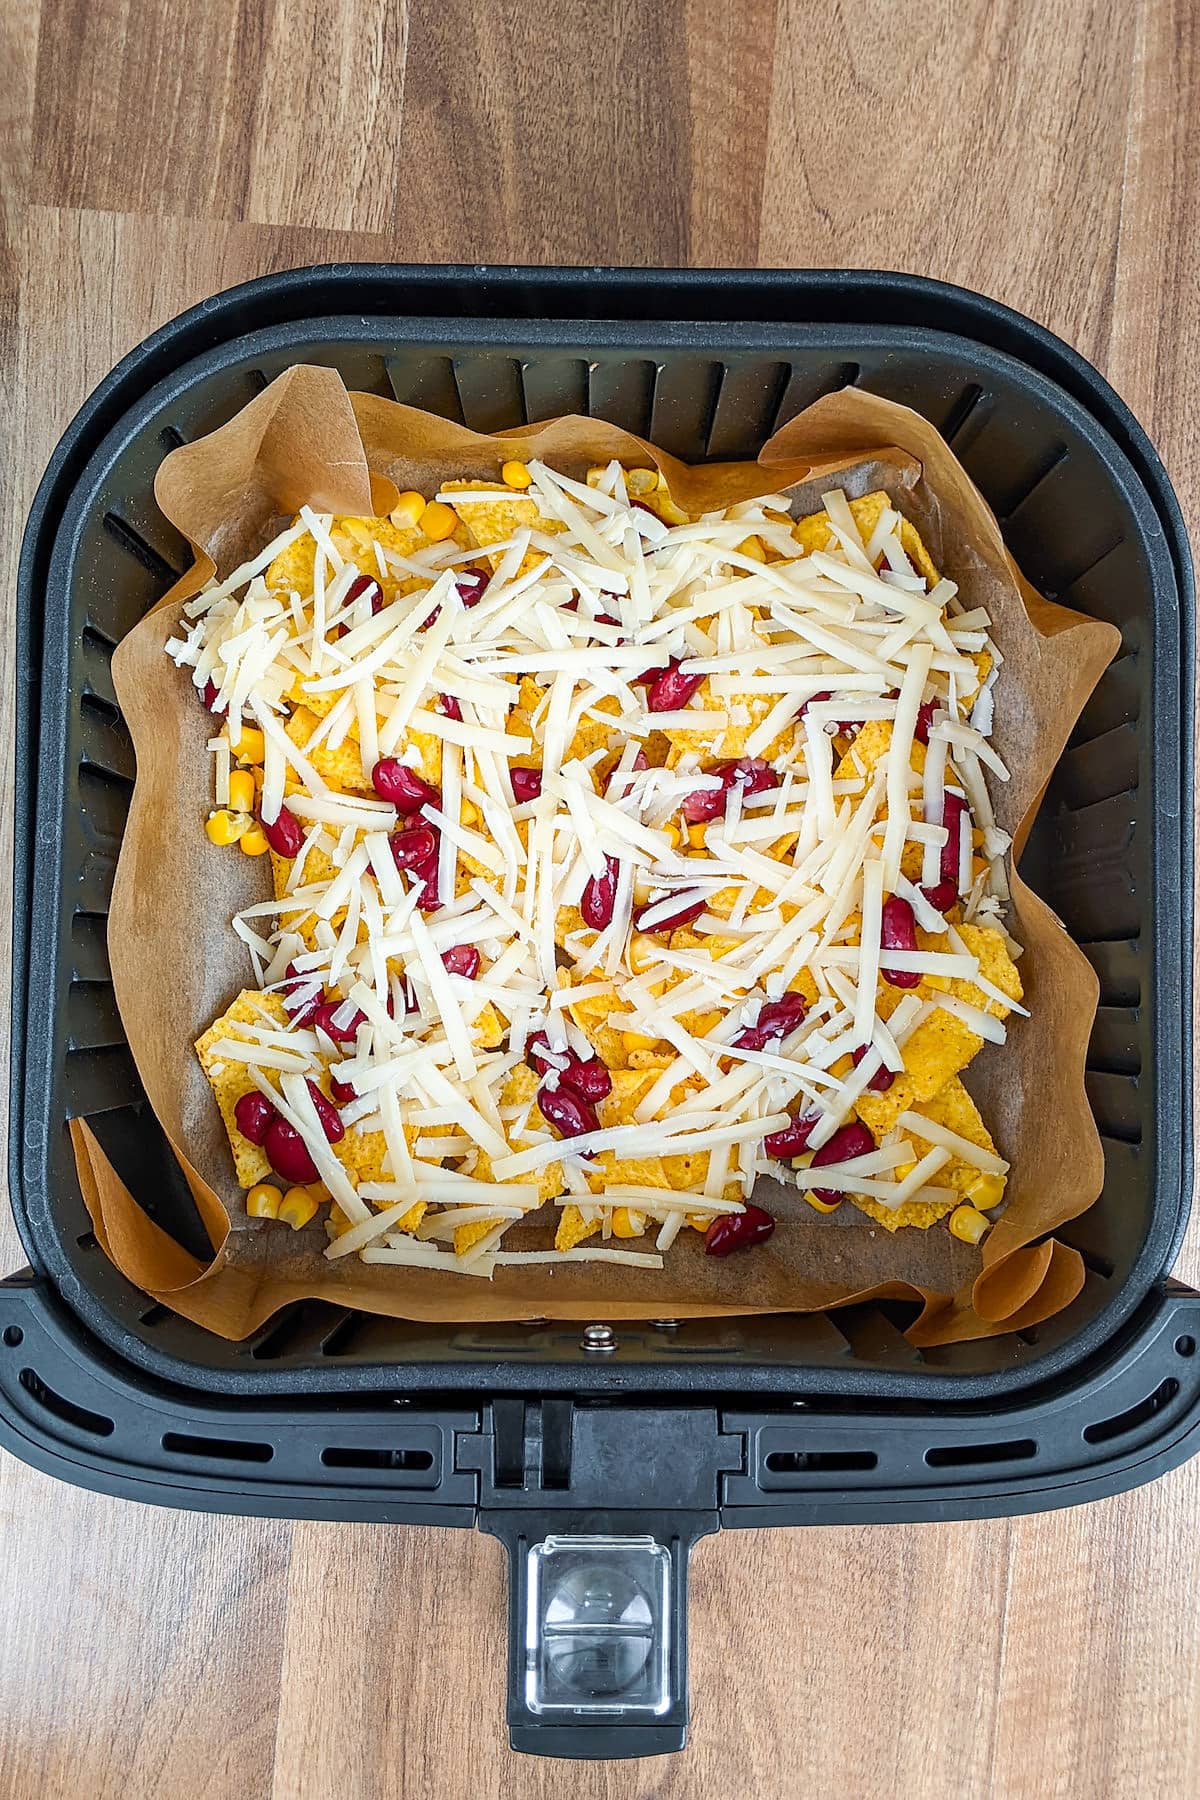 Air fryer basket with tortilla chips with shredded gruyere cheese, tortillas and beans.